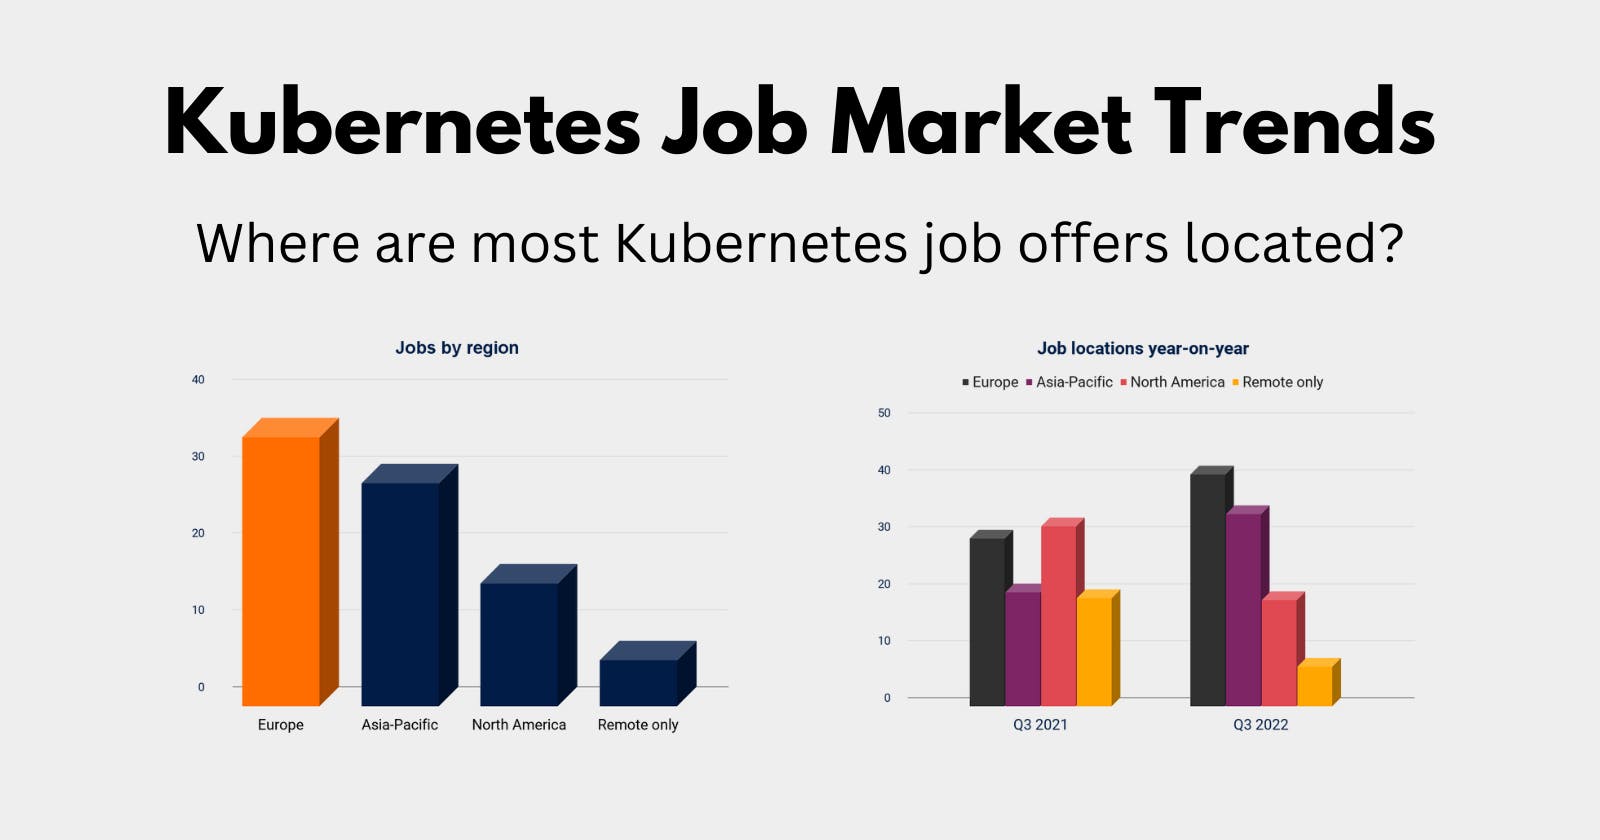 Where are most Kubernetes job offers located? Let's try to find out.